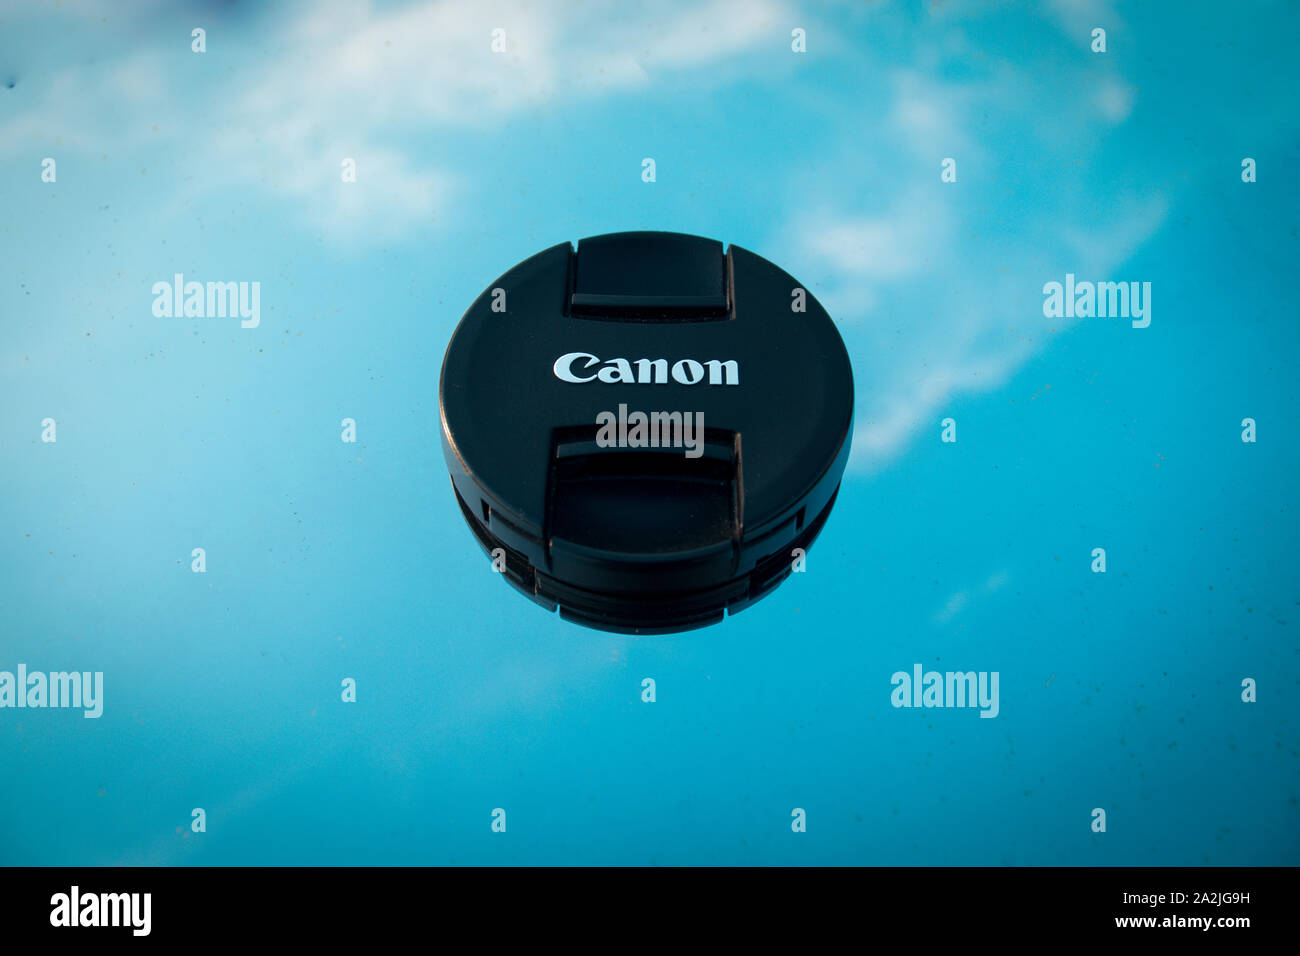 Canon cap, on glass in sky background. Stock Photo